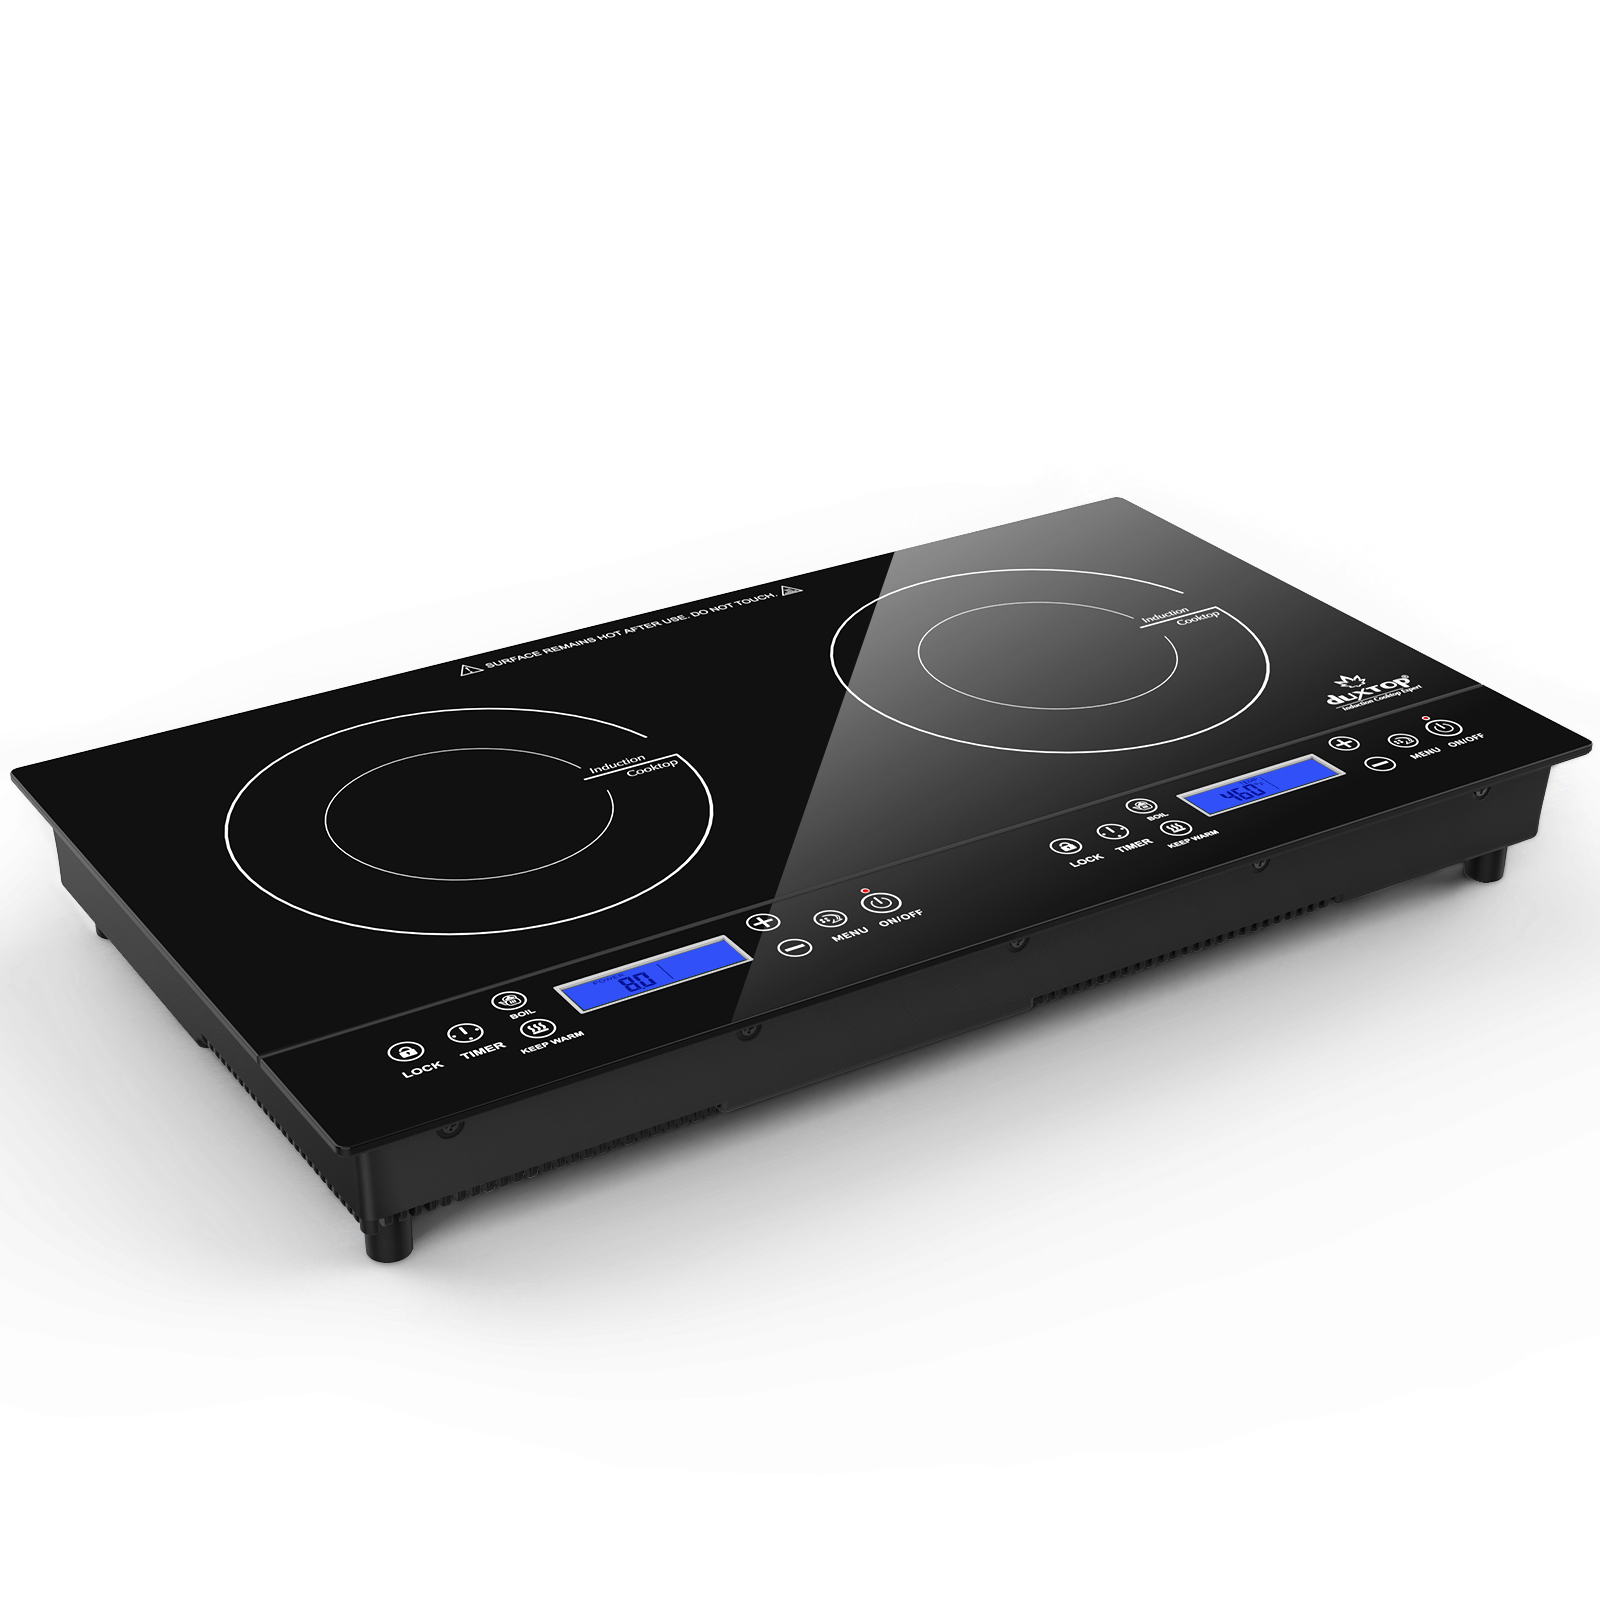 Duxtop Portable Induction Cooktop, Countertop Burner Induction Hot Plate with LCD Sensor